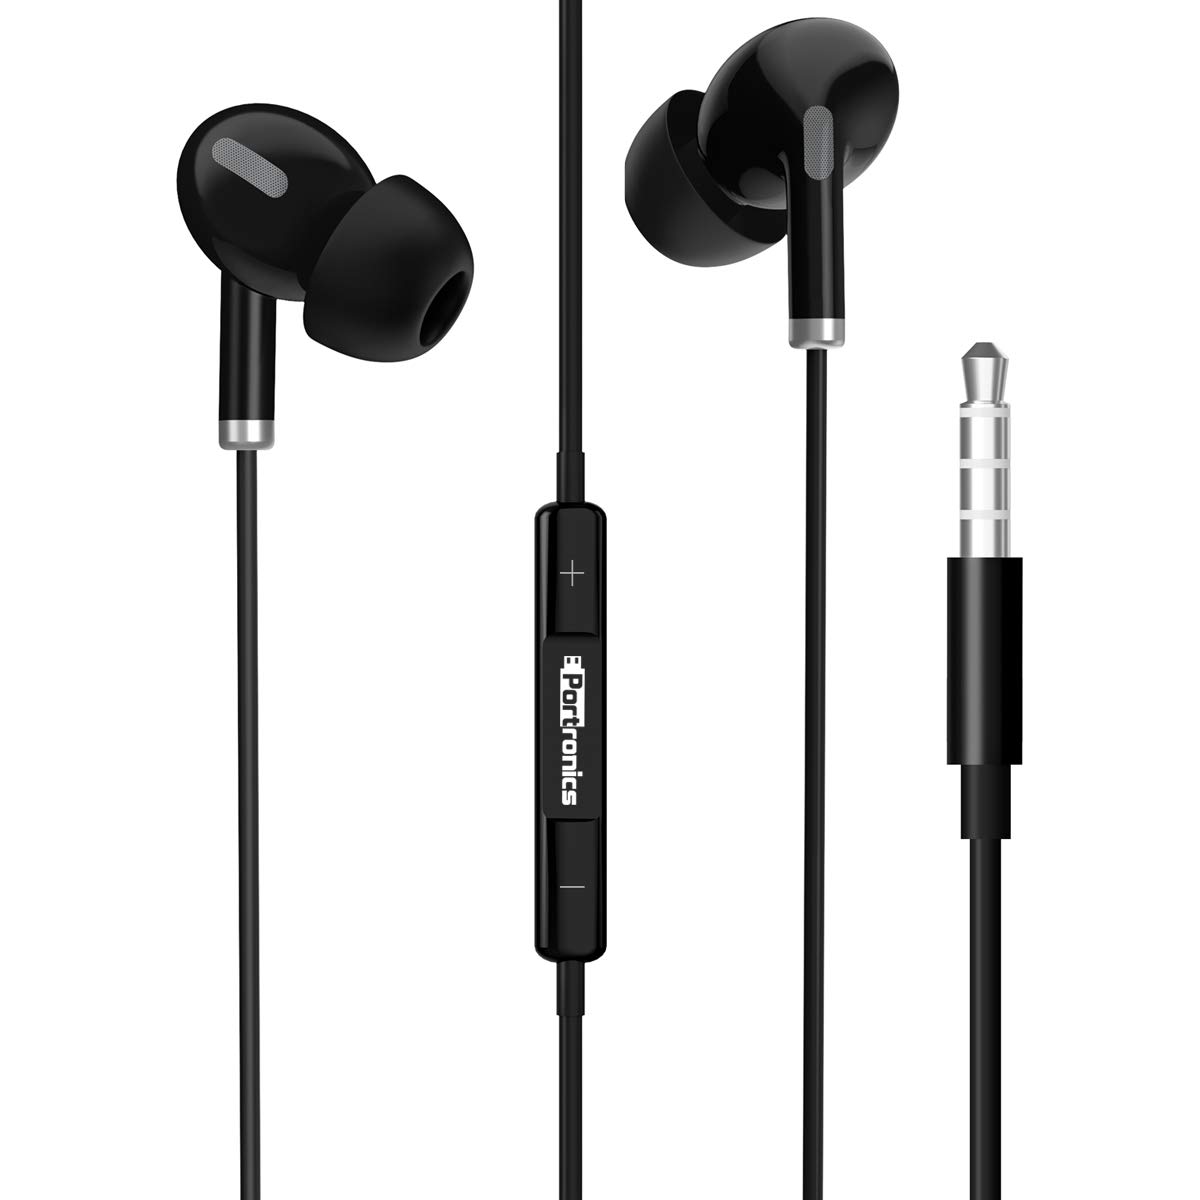 Portronics Conch Delta POR-1155 In Ear Noise Reduction Wired Earphones With 6 Months Warranty